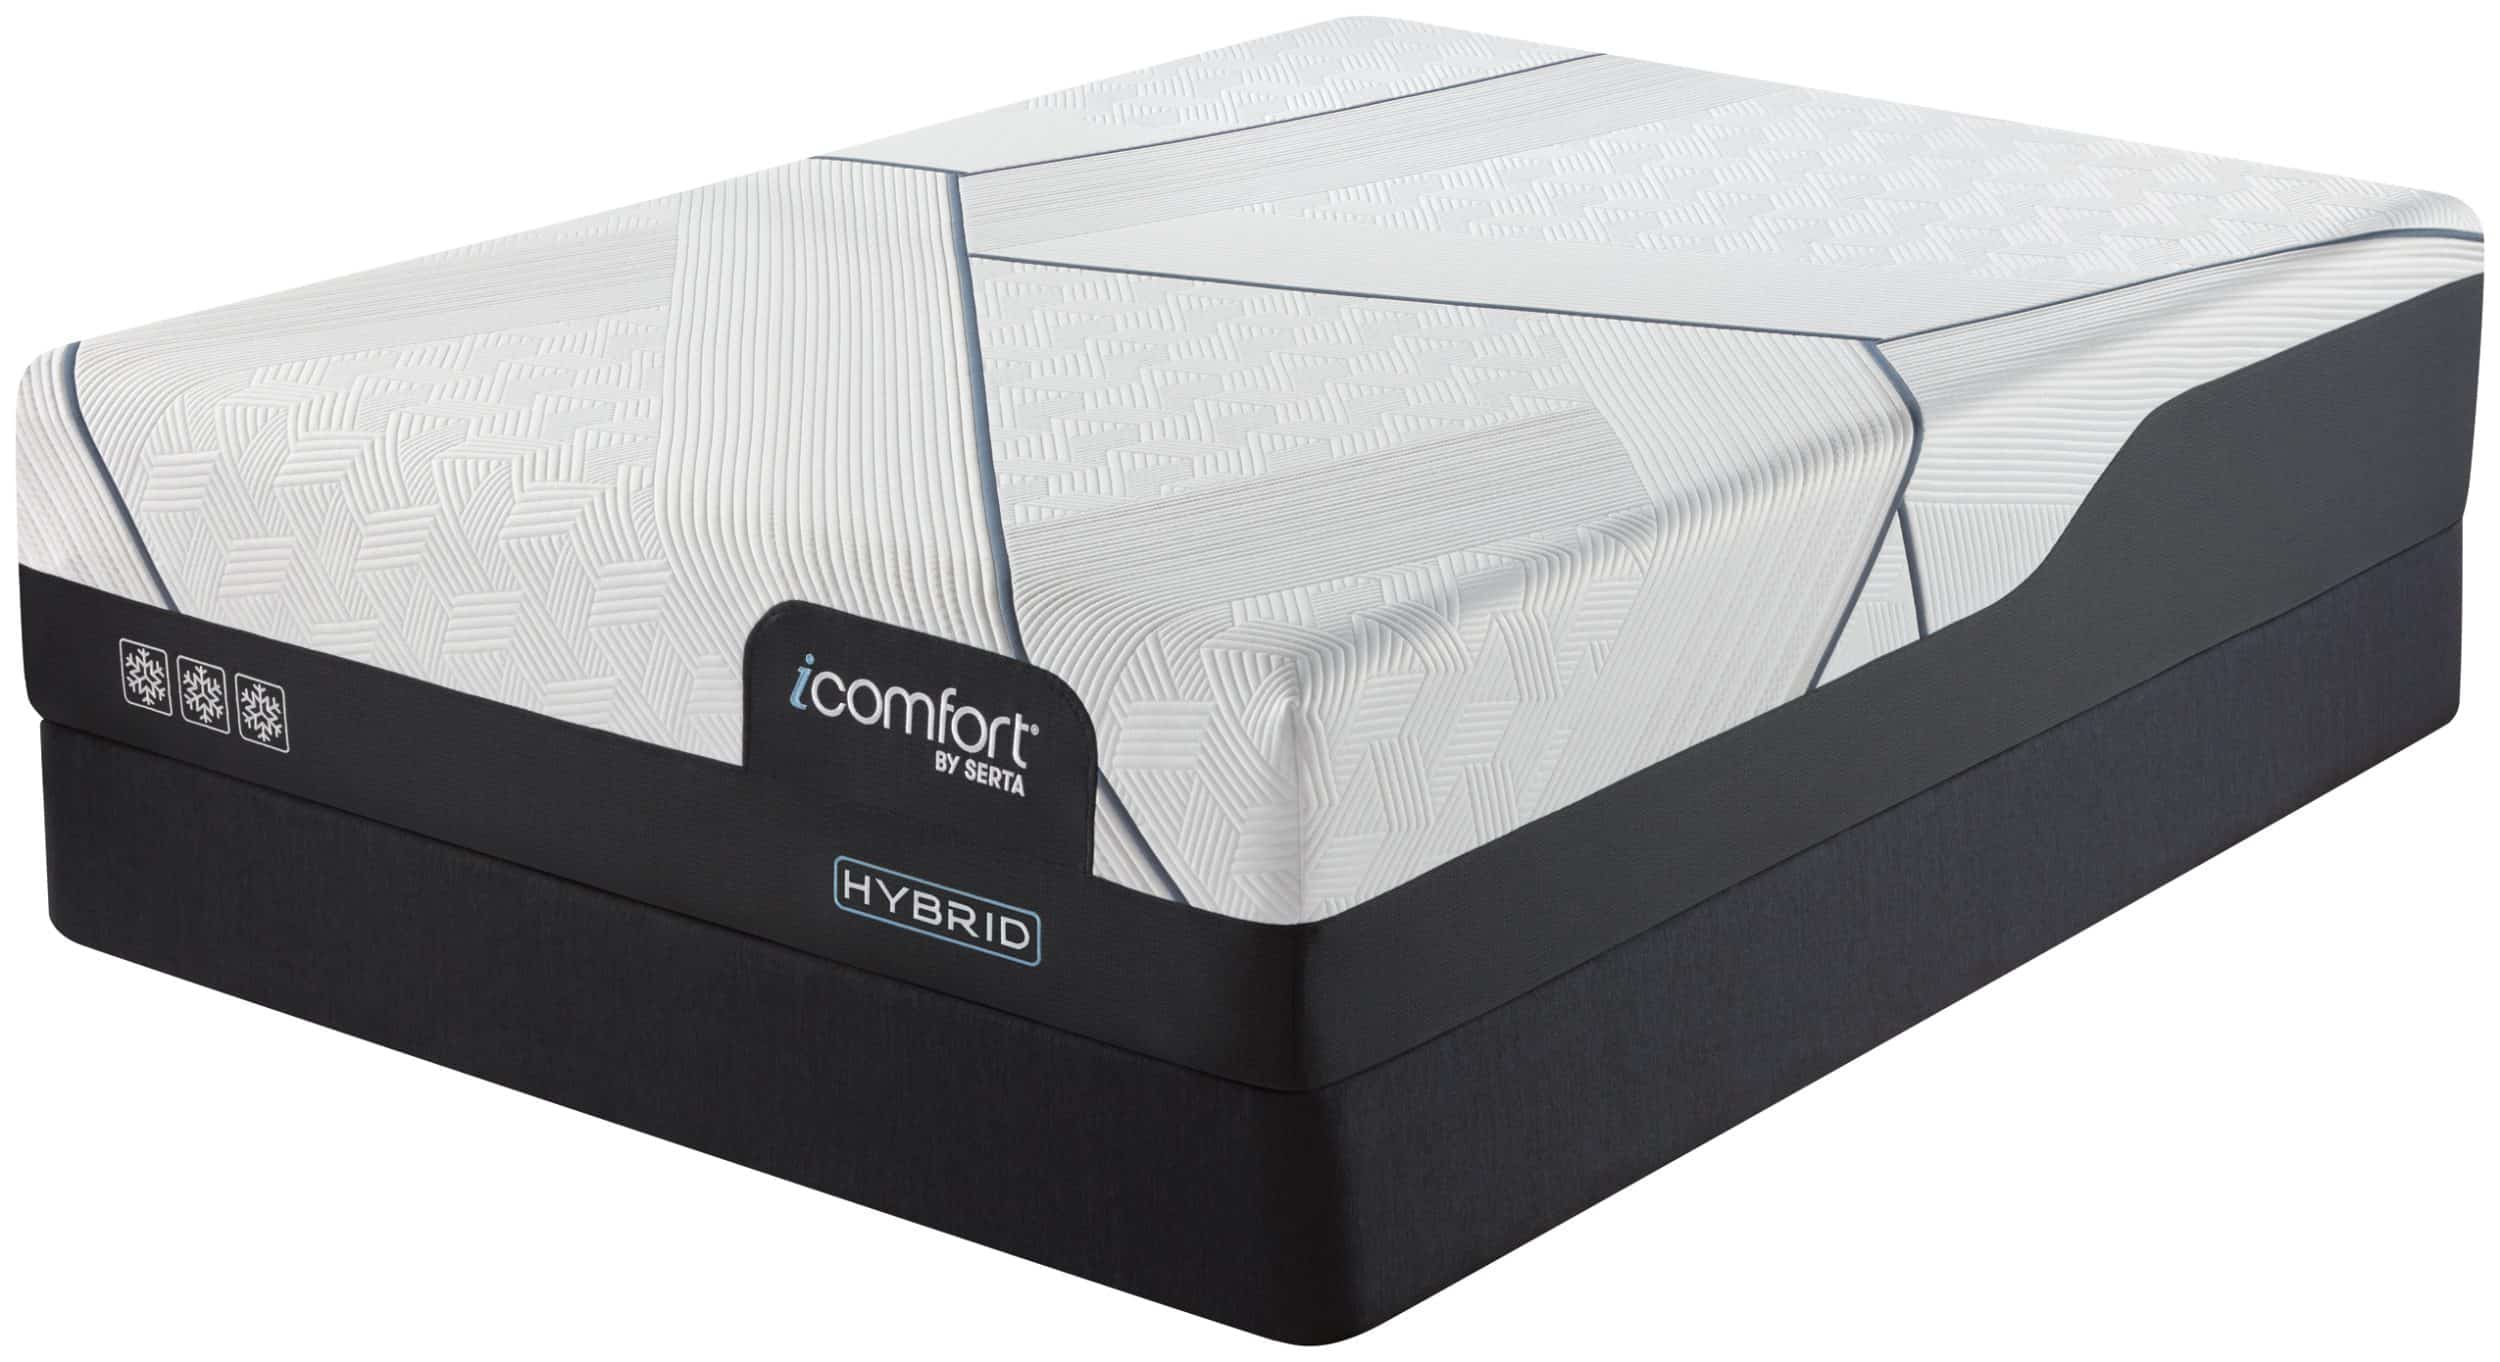 Corner picture of the iComfort Hybrid from Serta